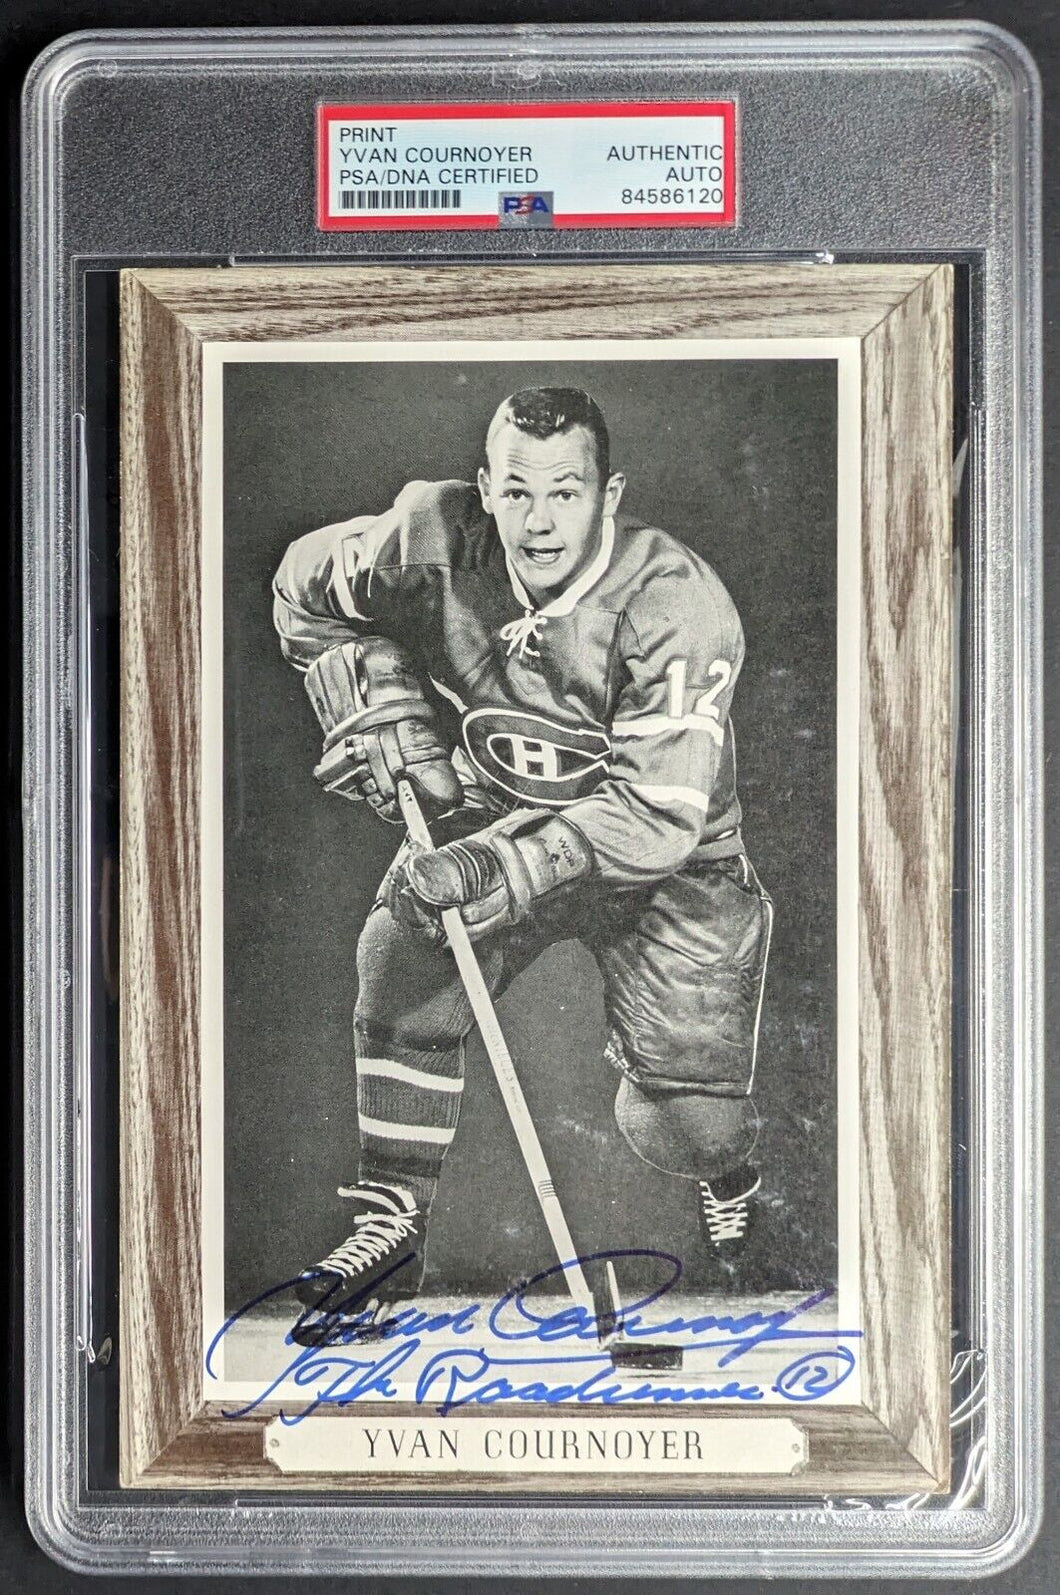 Yvan Cournoyer Autographed Group 2 Bee Hive Card Signed Montreal Canadiens PSA